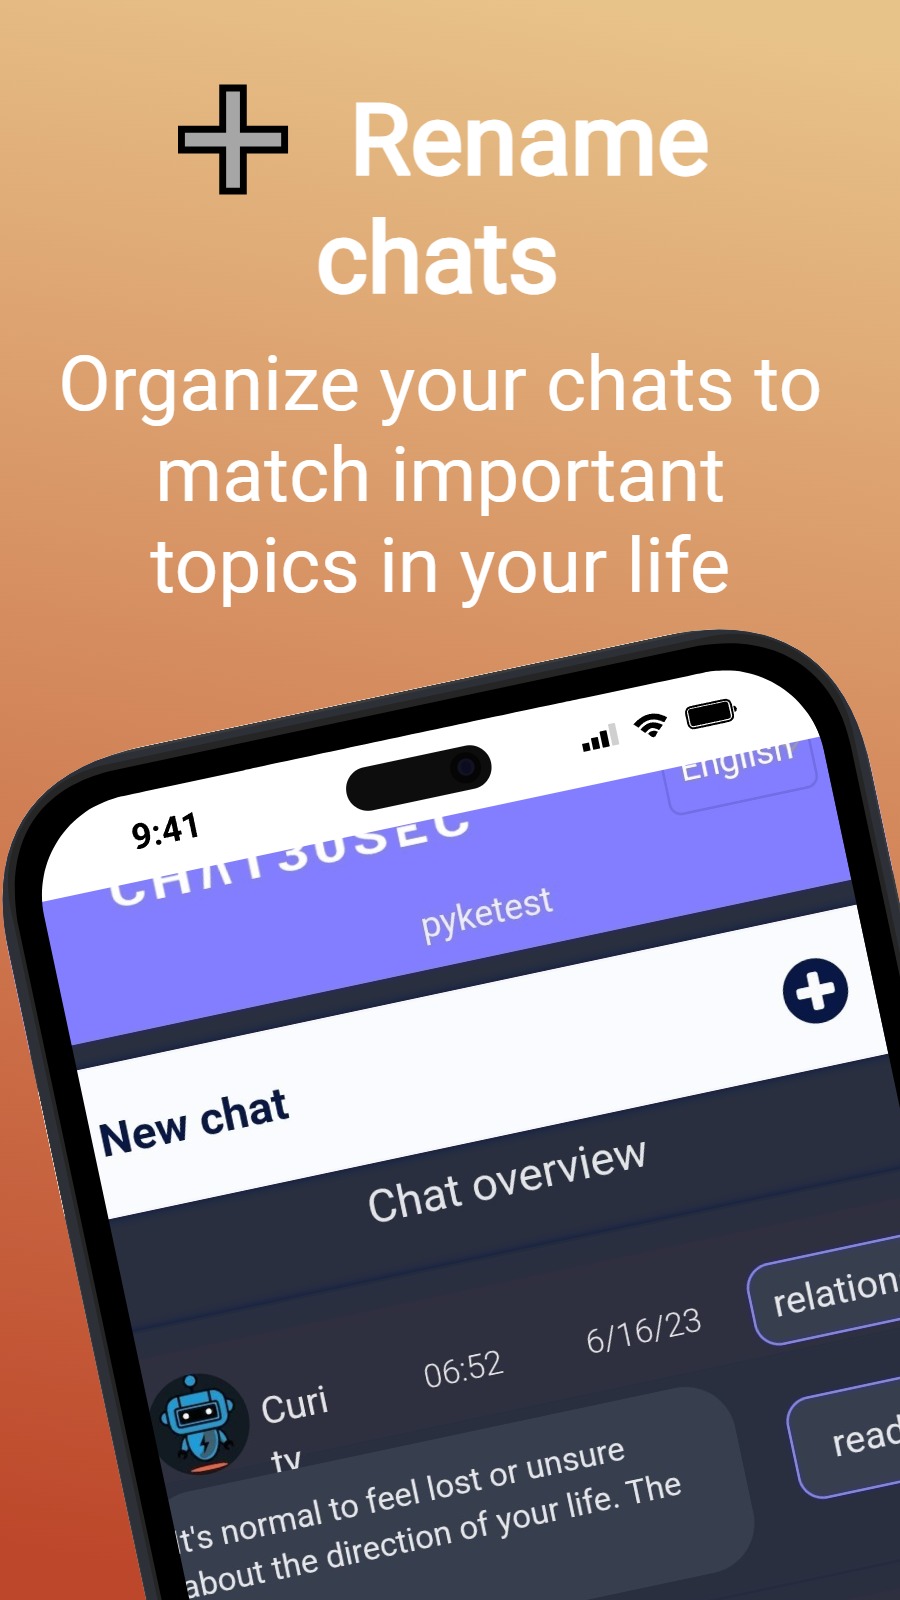 ➕  Rename chats - Organize your chats to match important topics in your life